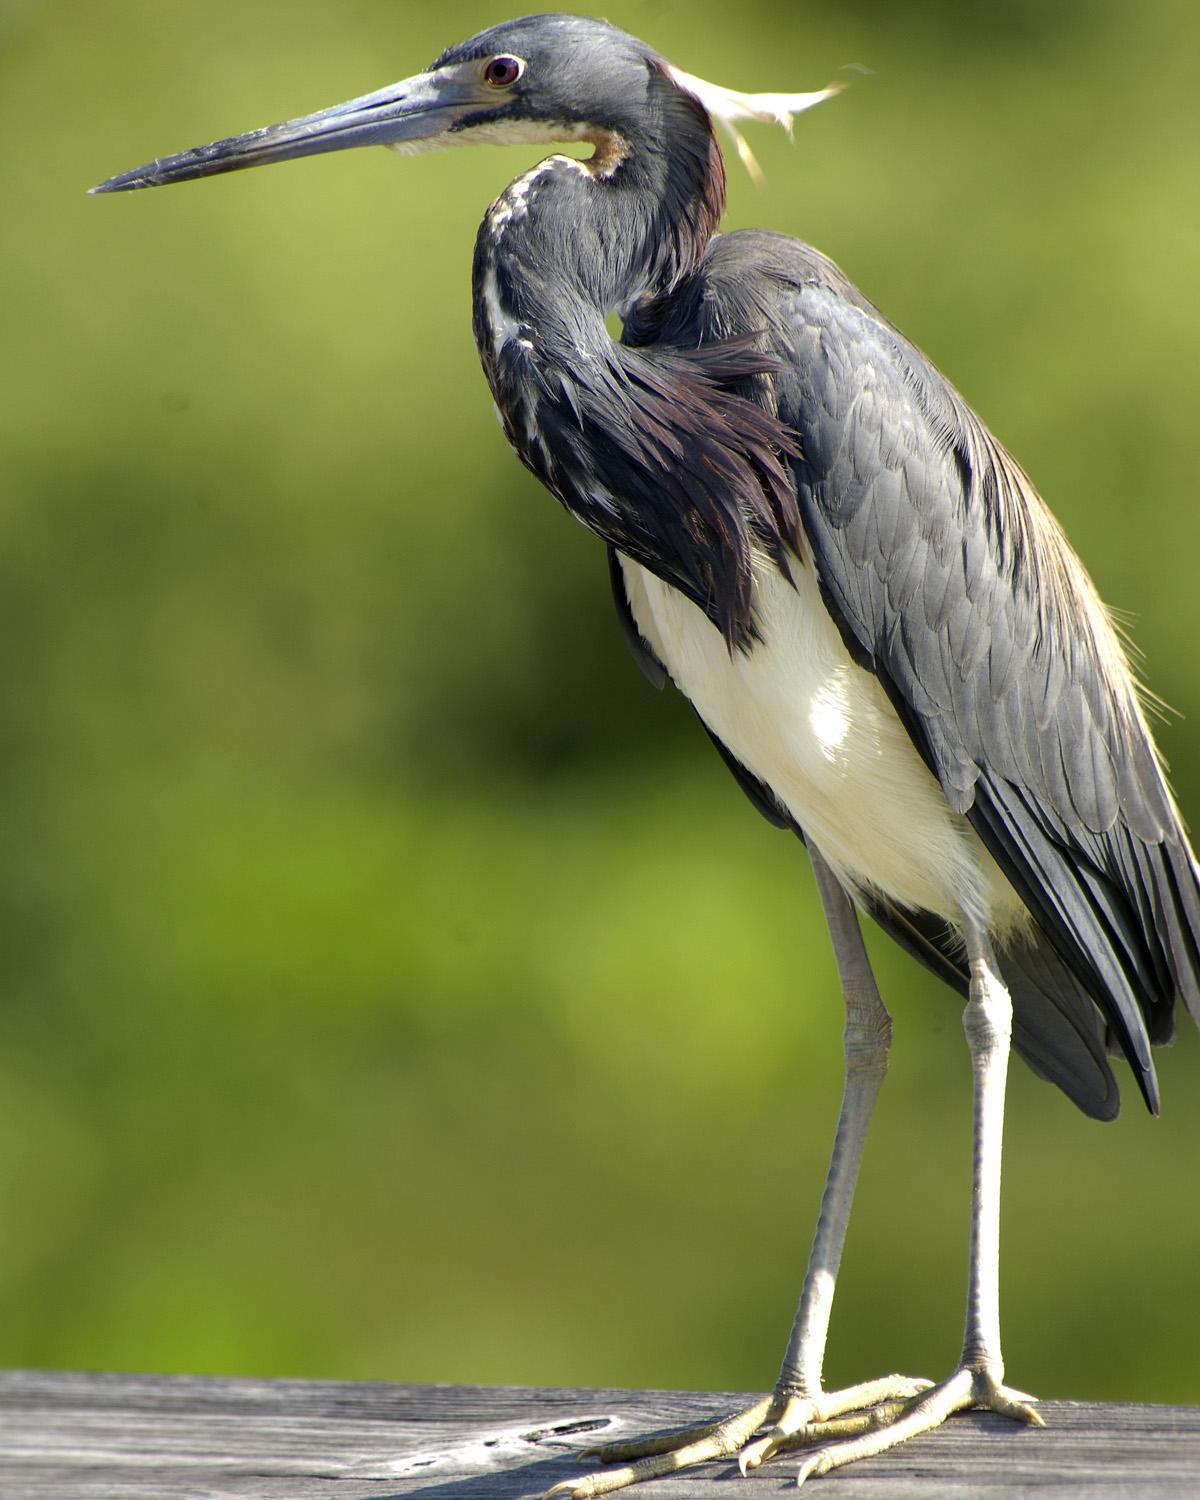 Tricolored Heron Photo by Magill Weber